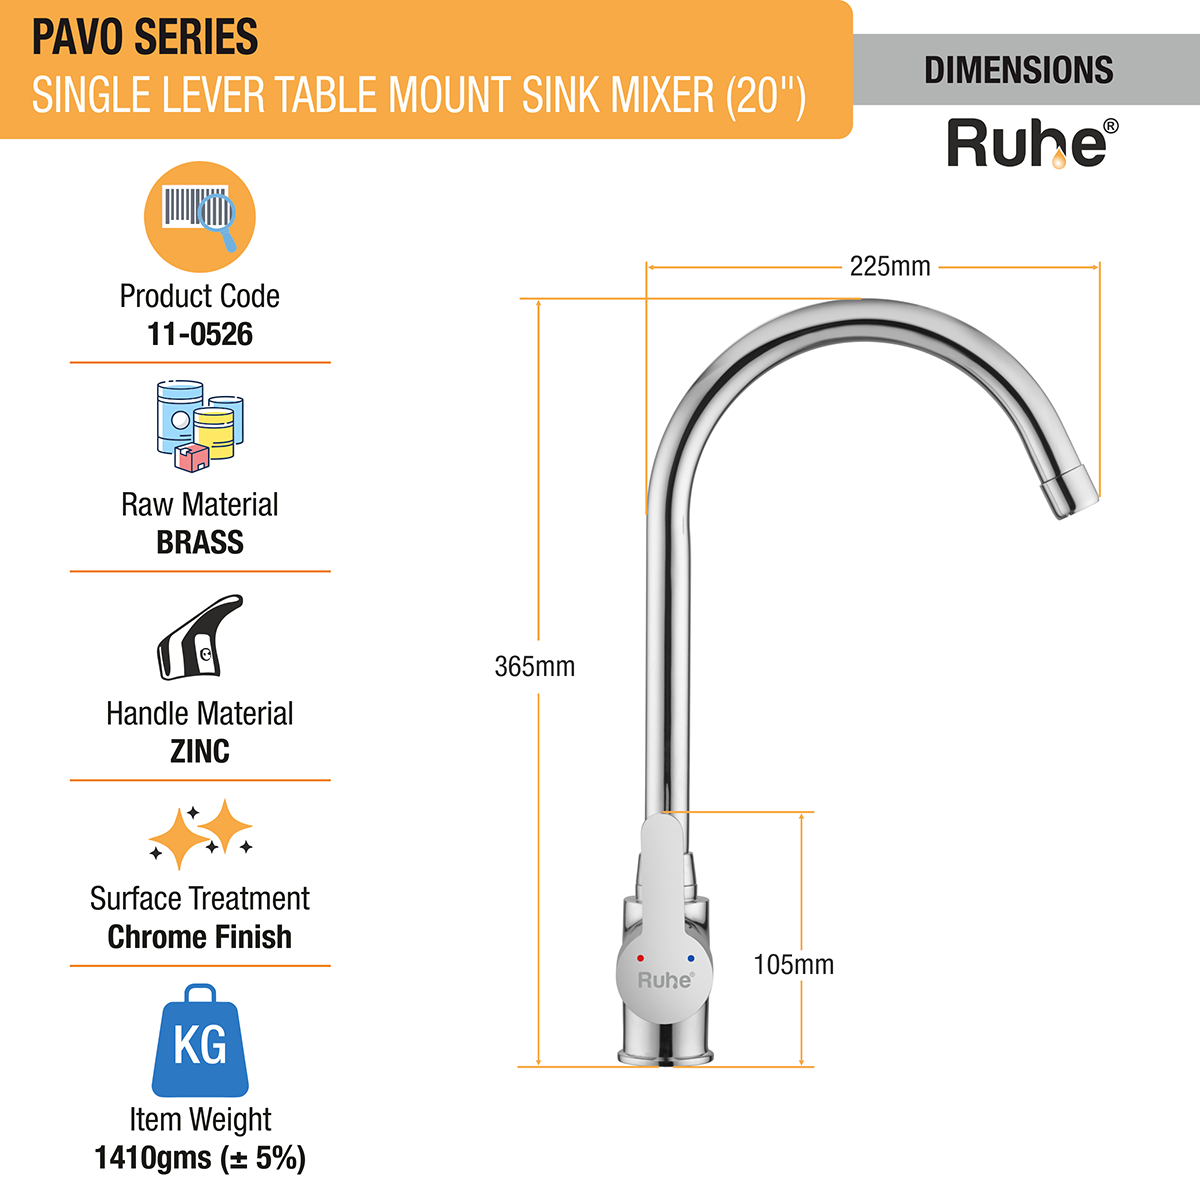 Pavo Single Lever Table Mount Sink Mixer with Large (20 inches) Round Swivel Spout Faucet dimensions and sizes